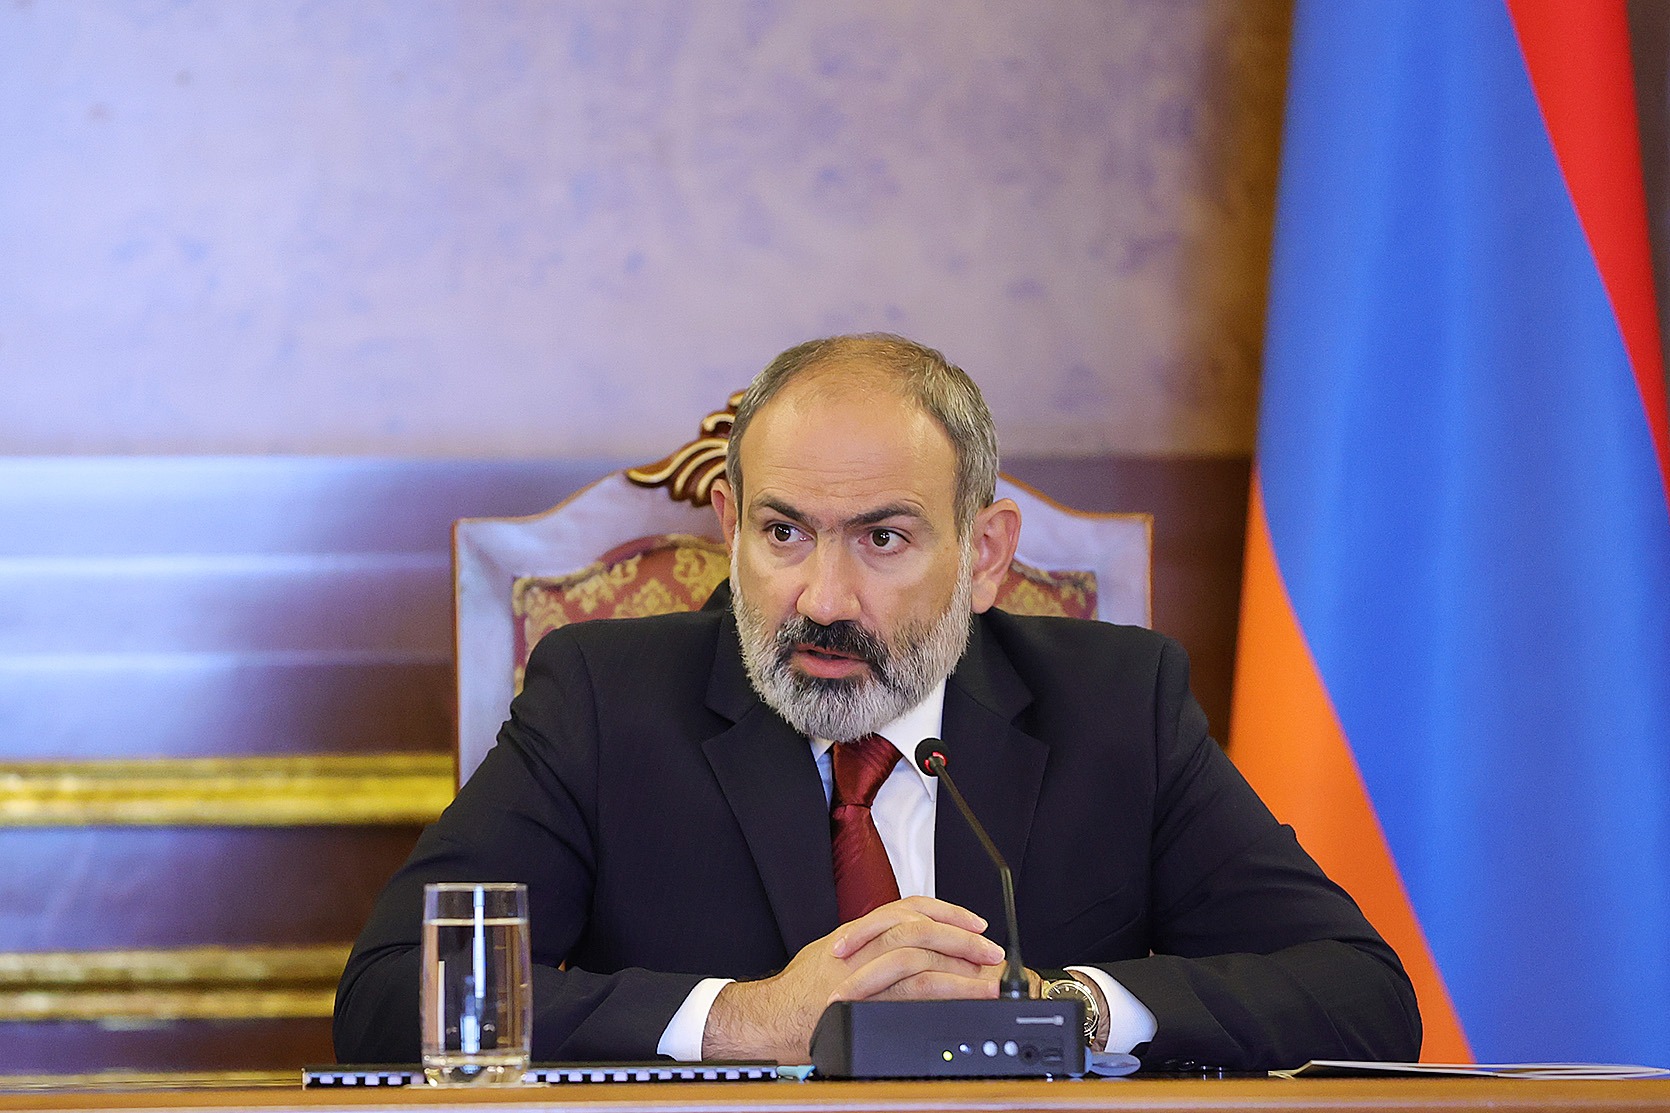 Nikol Pashinyan called Azerbaijan’s actions inadmissible, considering it an obvious gross violation of international humanitarian law